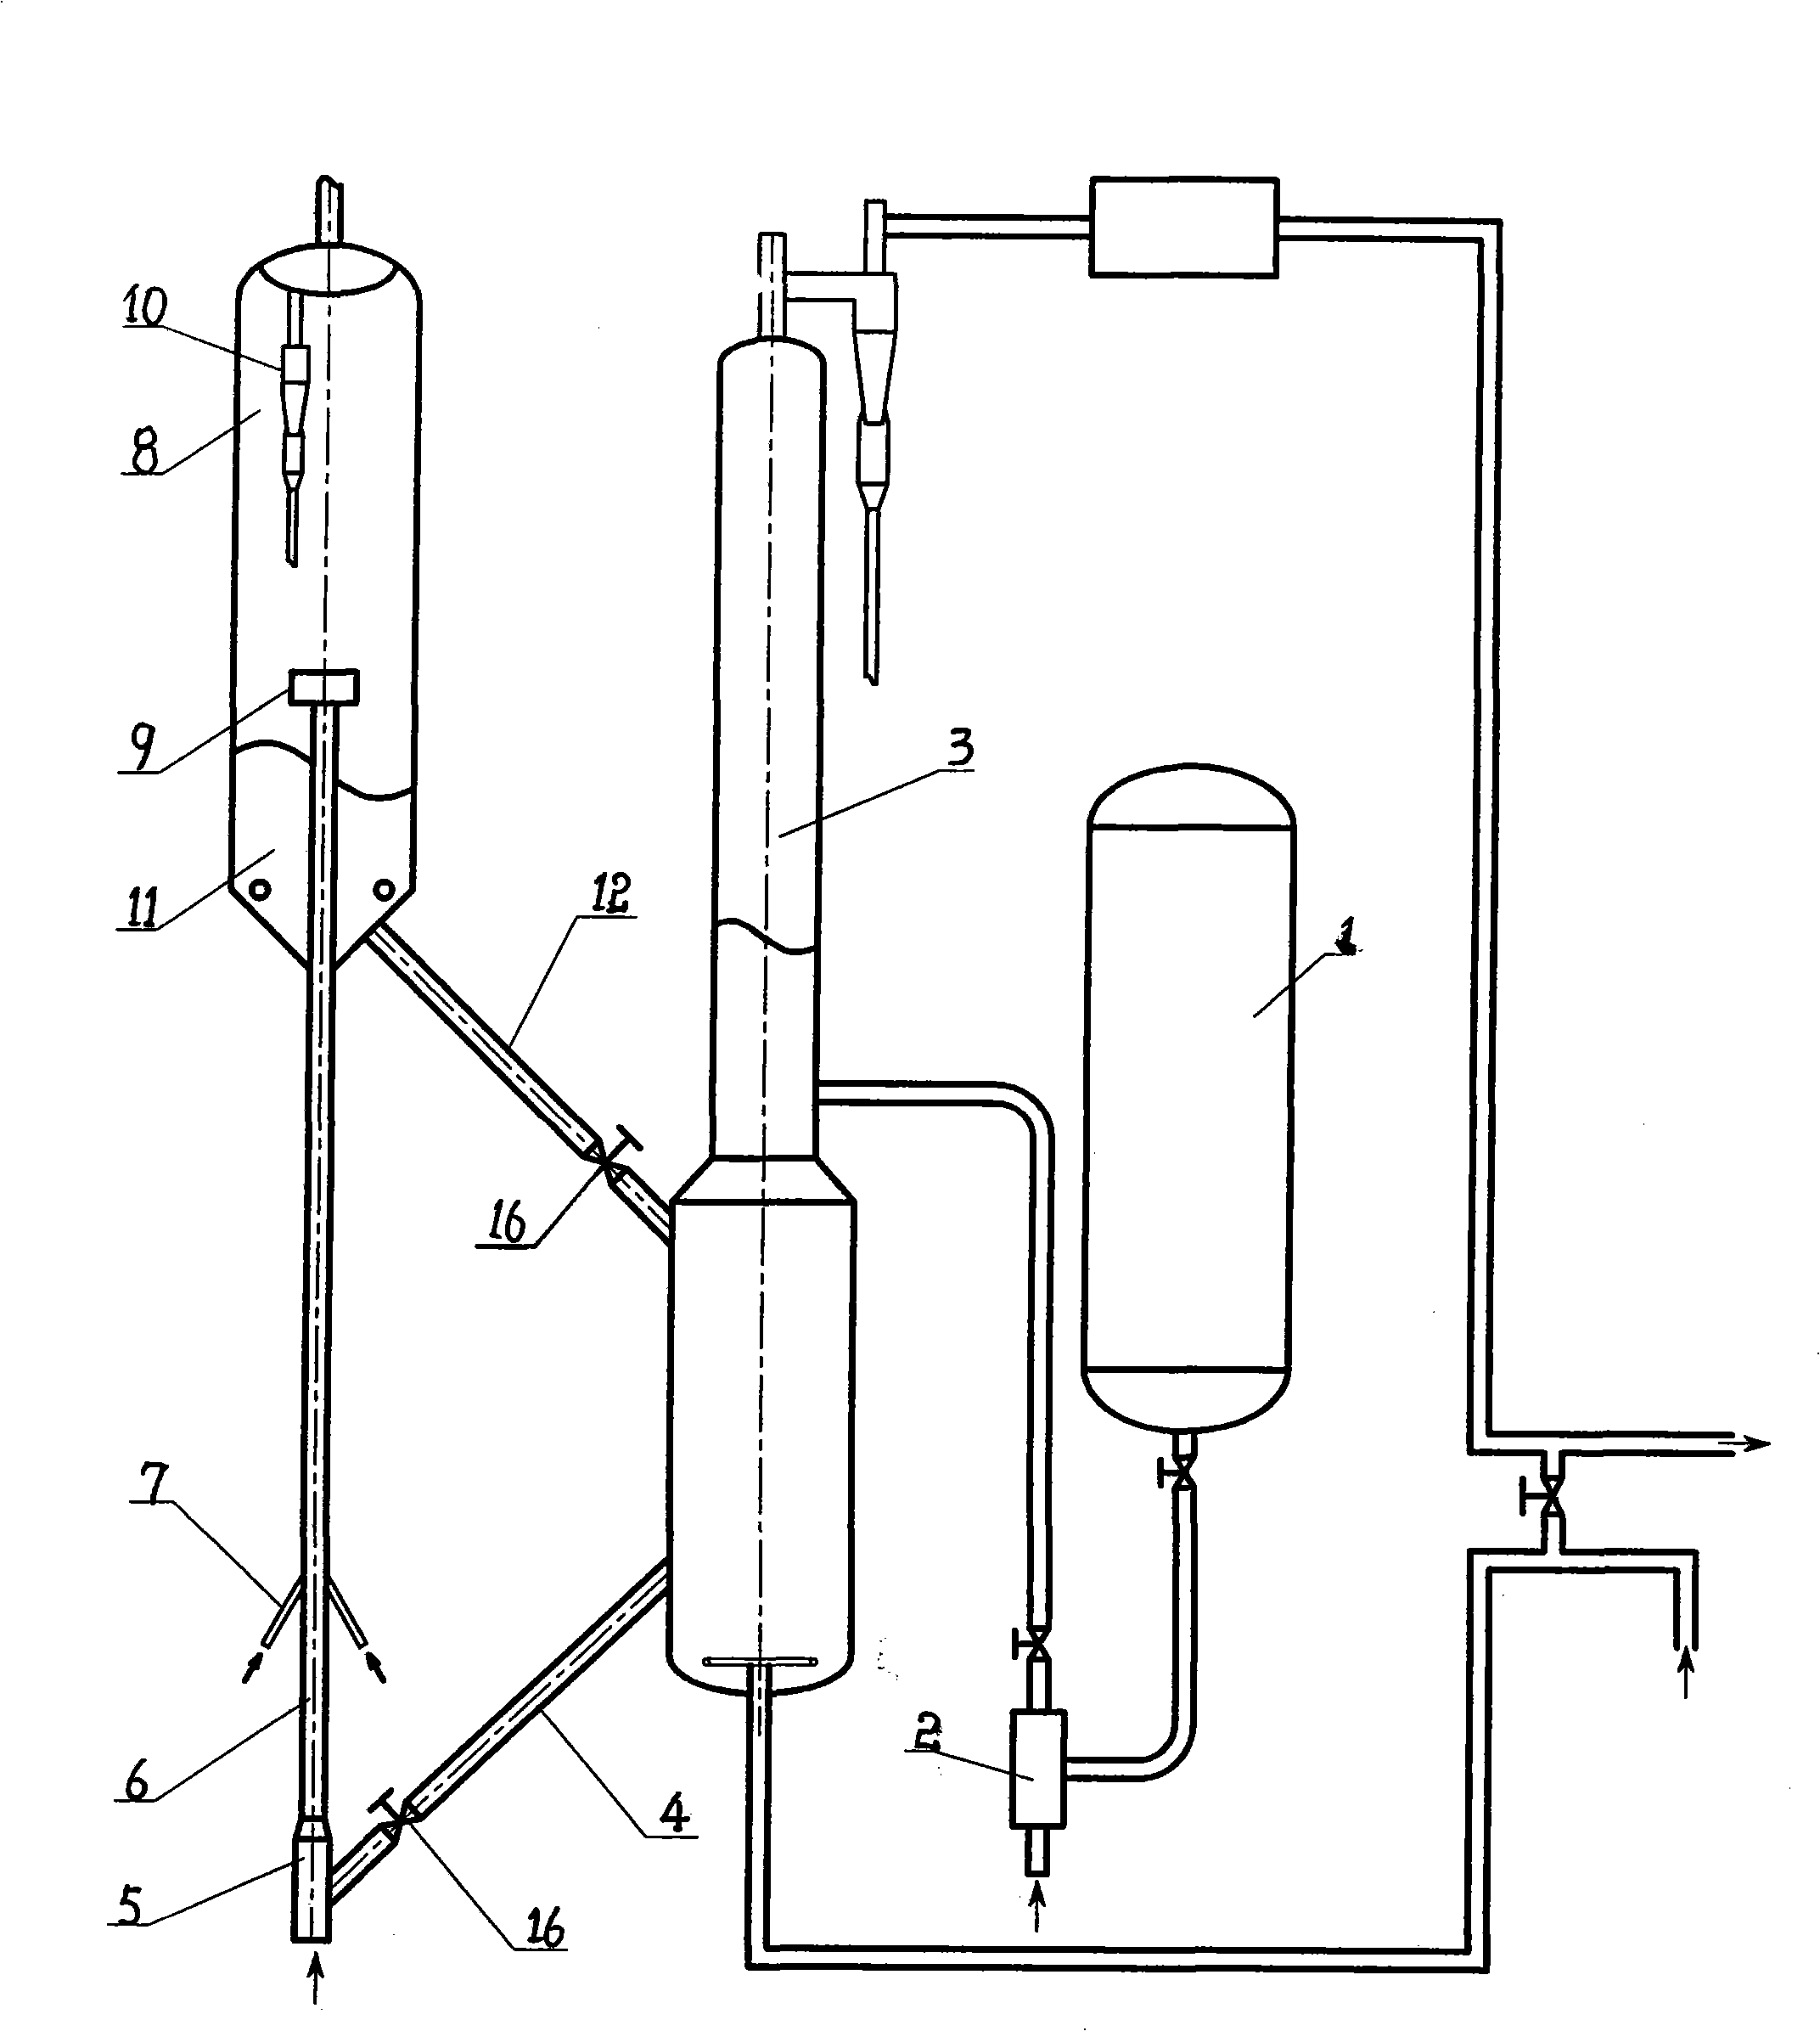 Equipment for preparing carbon disulfide with circulating fluidized bed